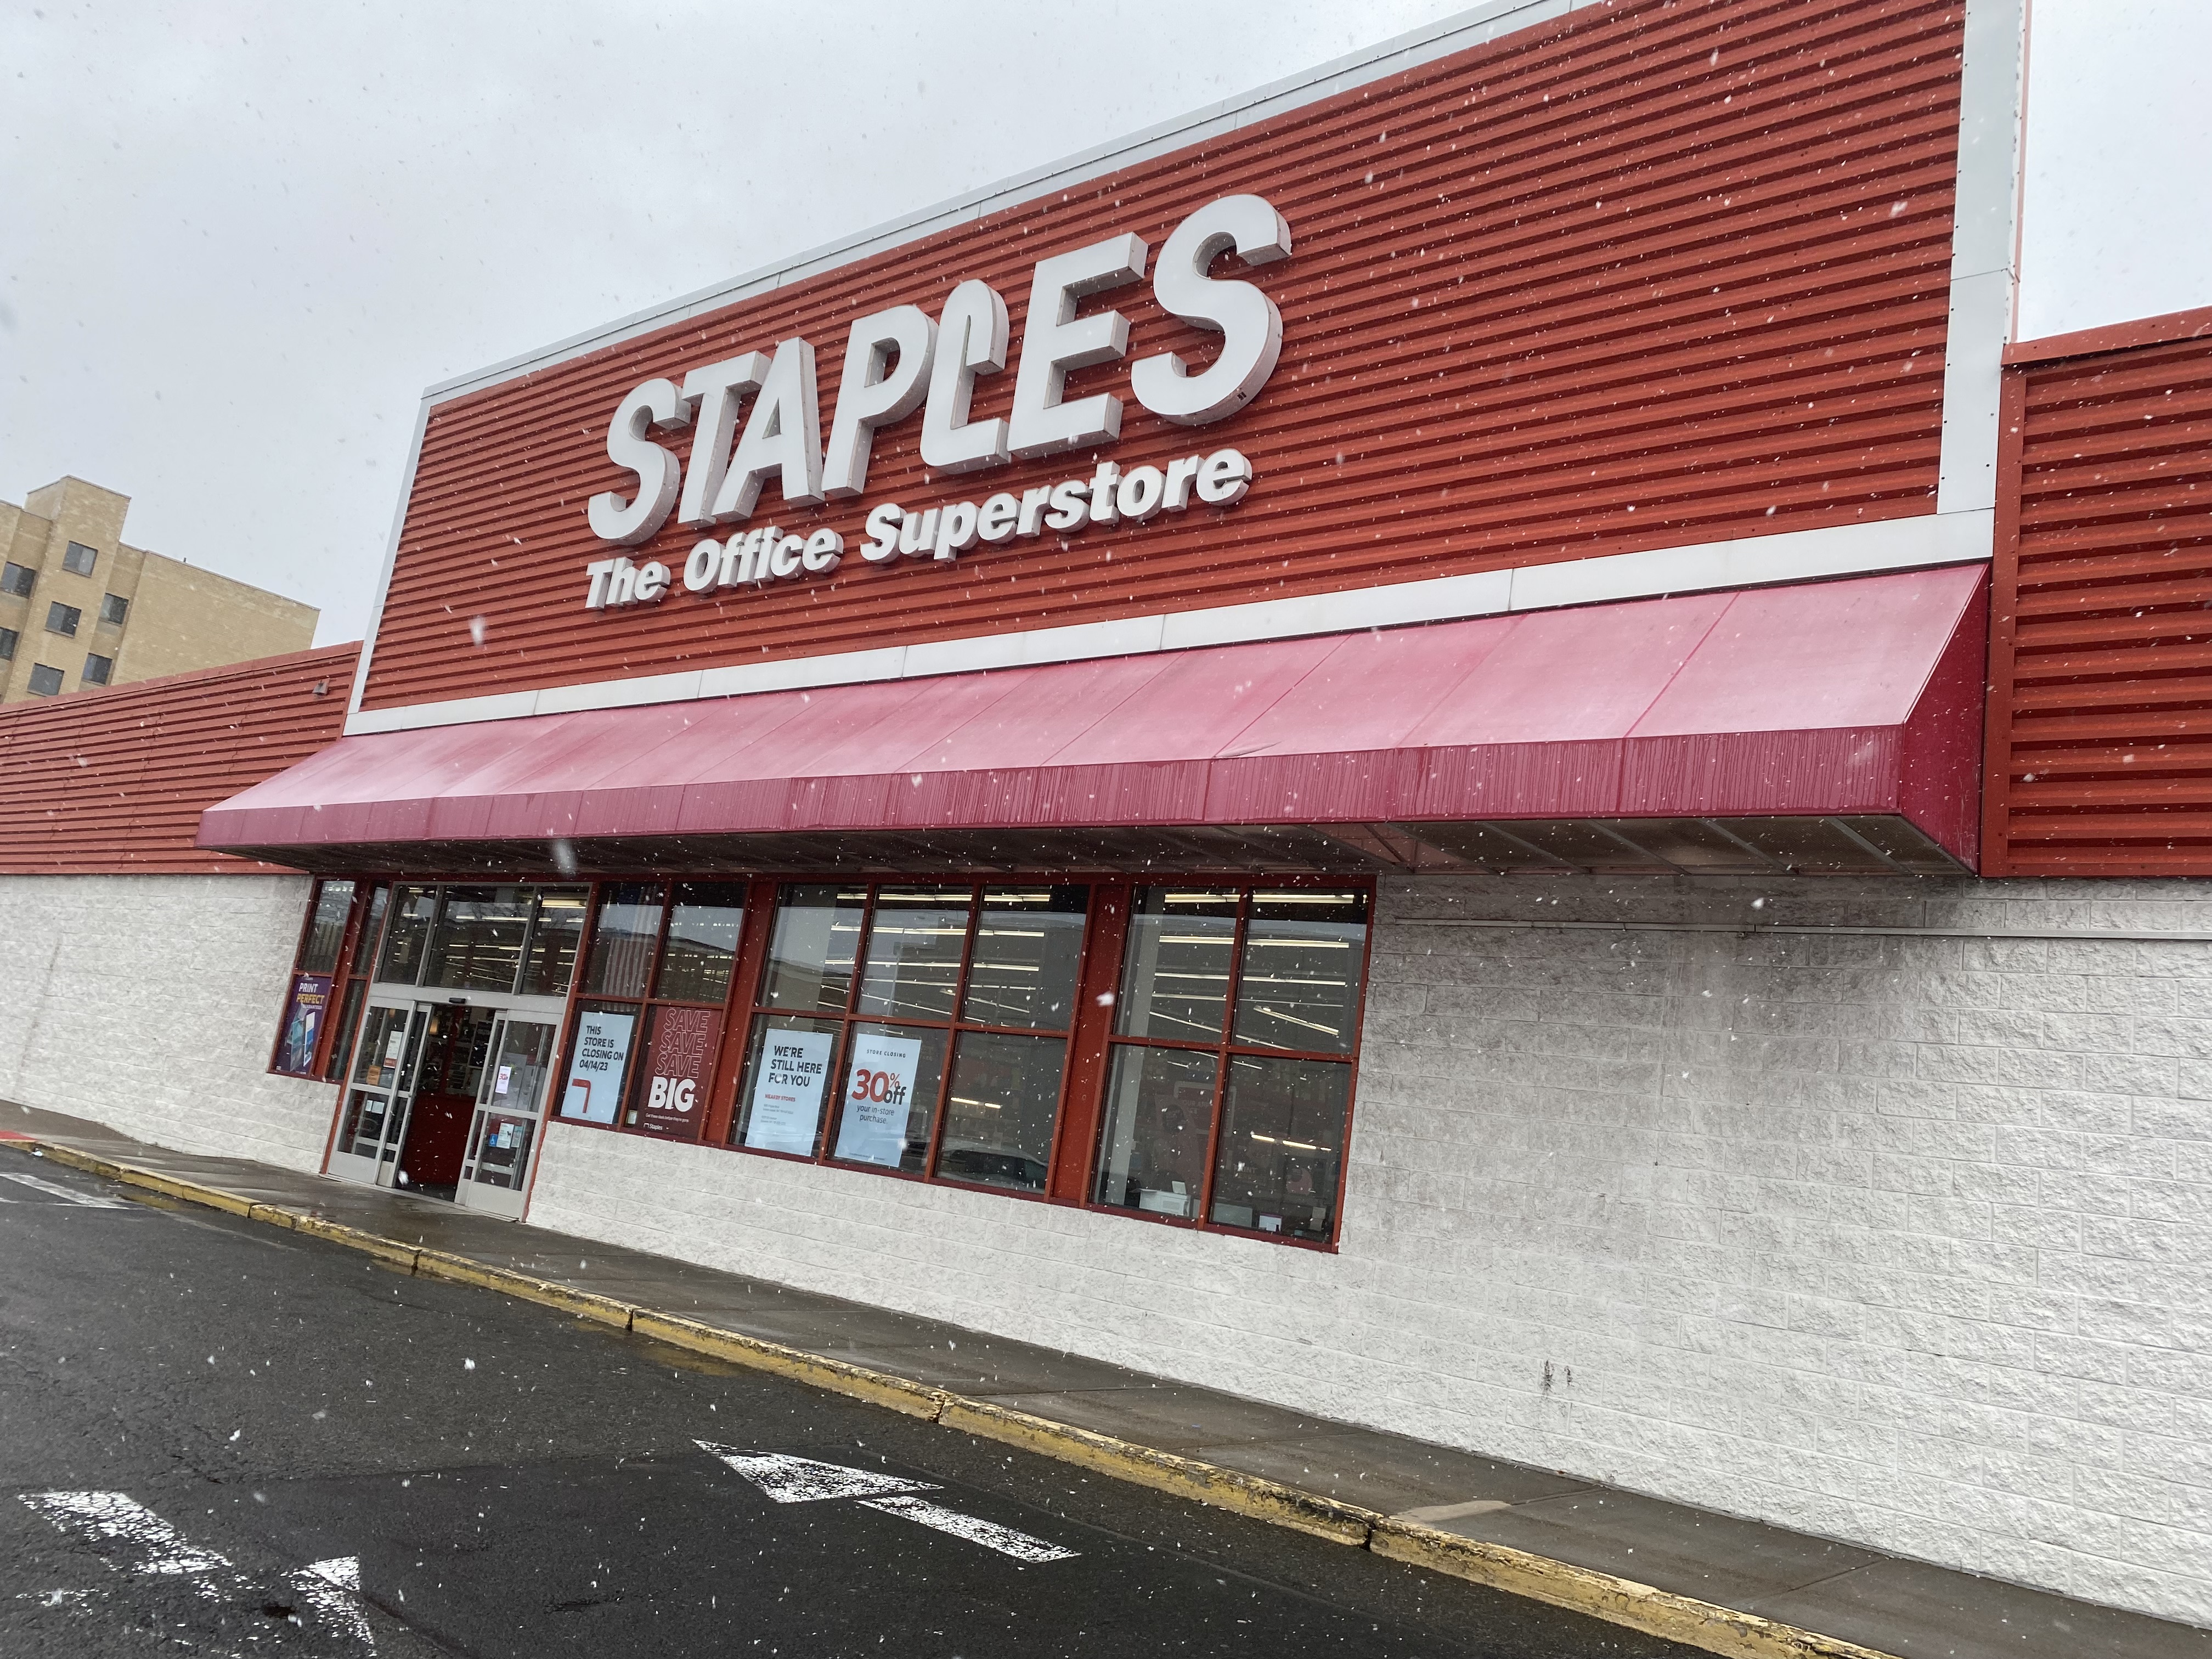 Staples store in Mattoon to close after Oct. 8